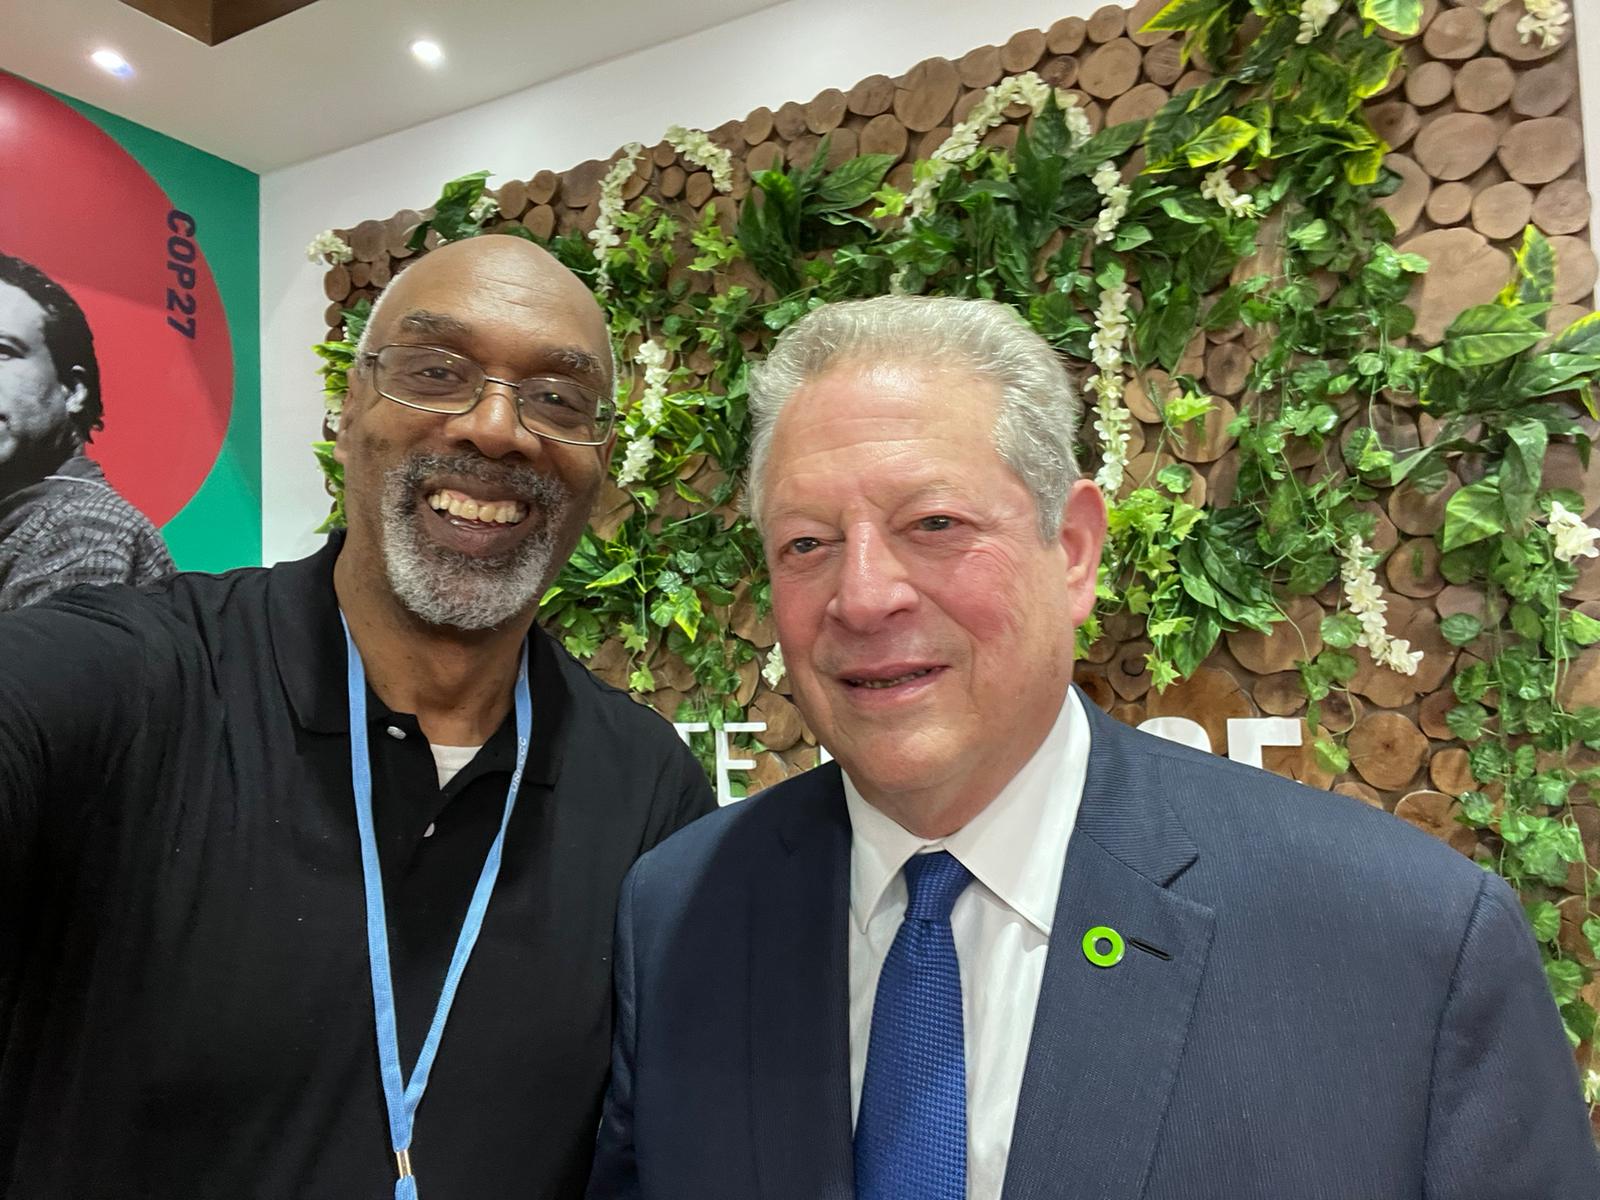 Aaron Mair with Al Gore